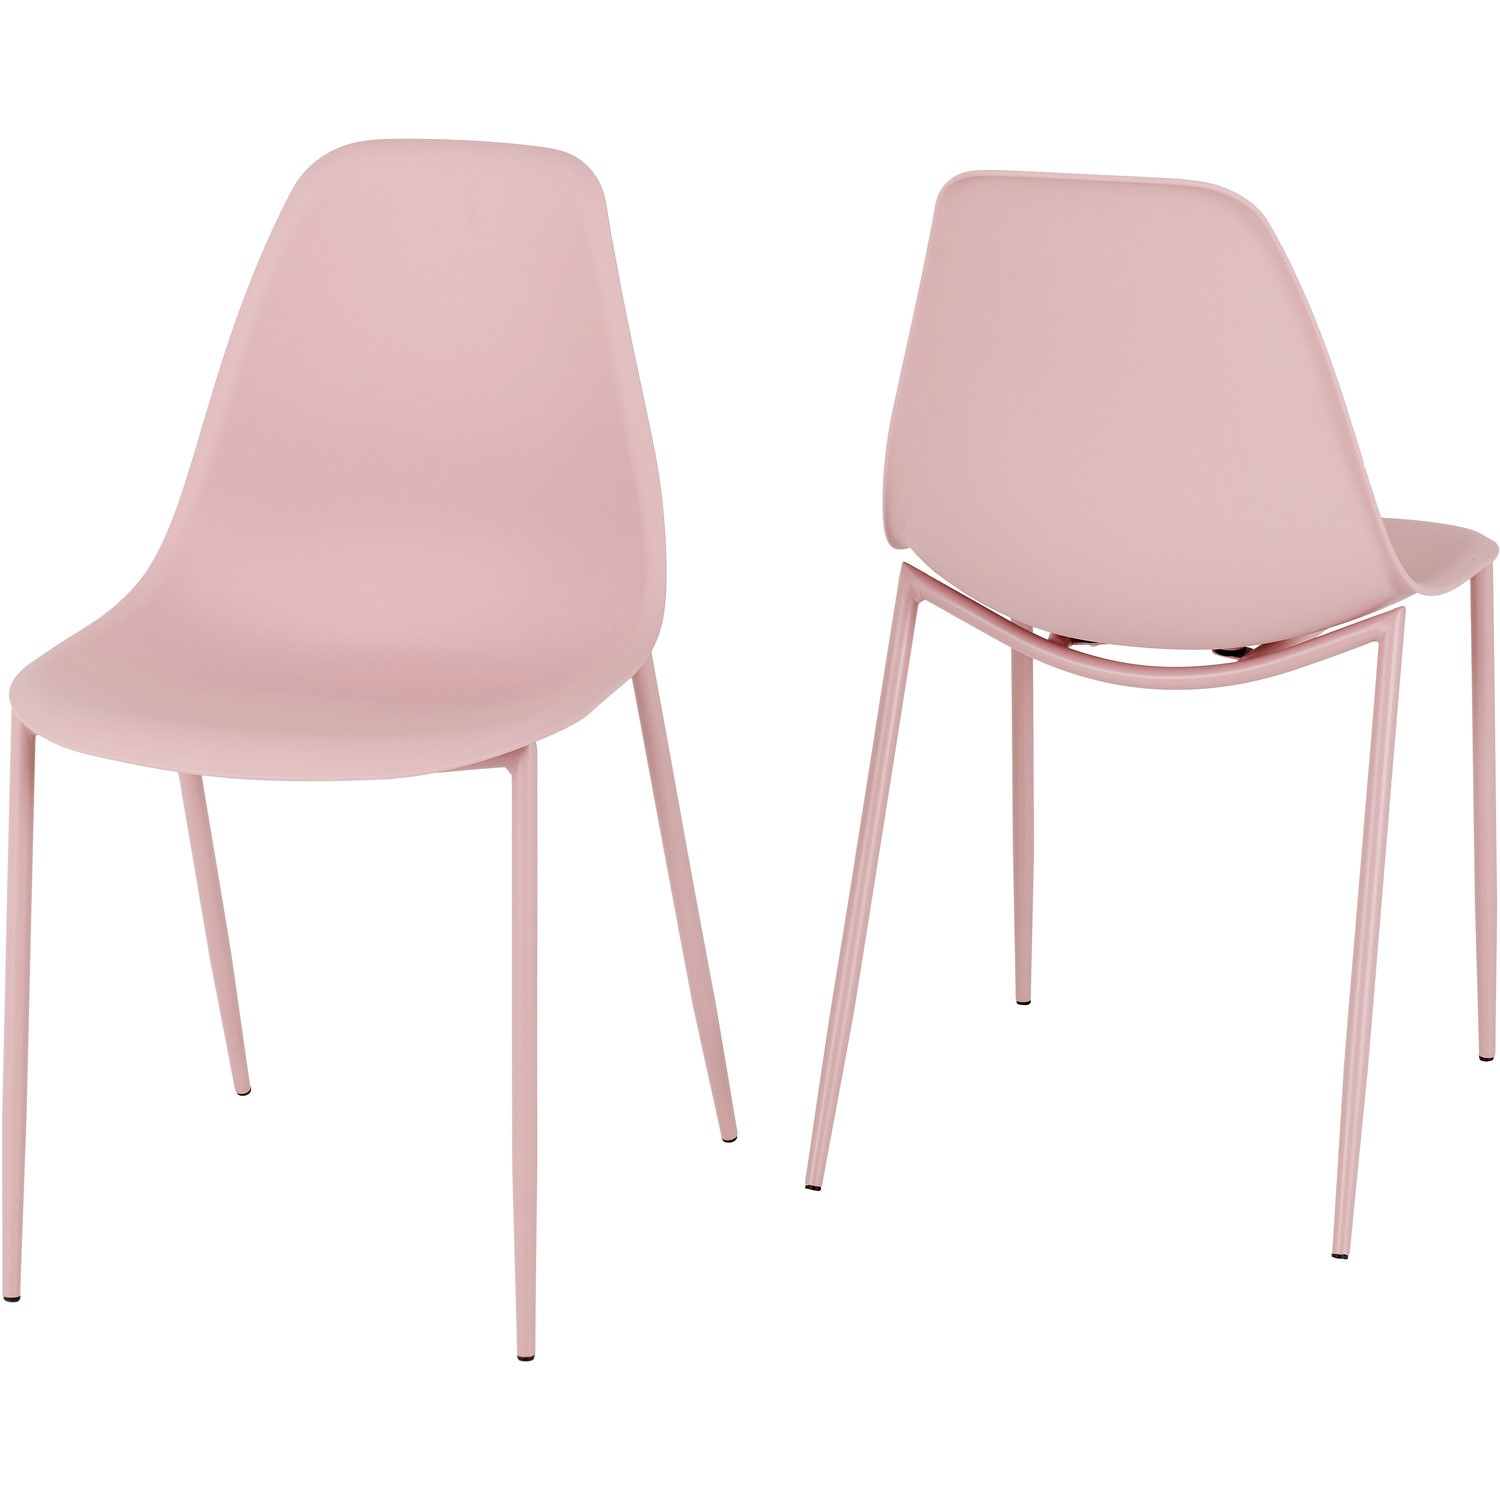 Photo of Set of 2 pink plastic dining chairs - lindon